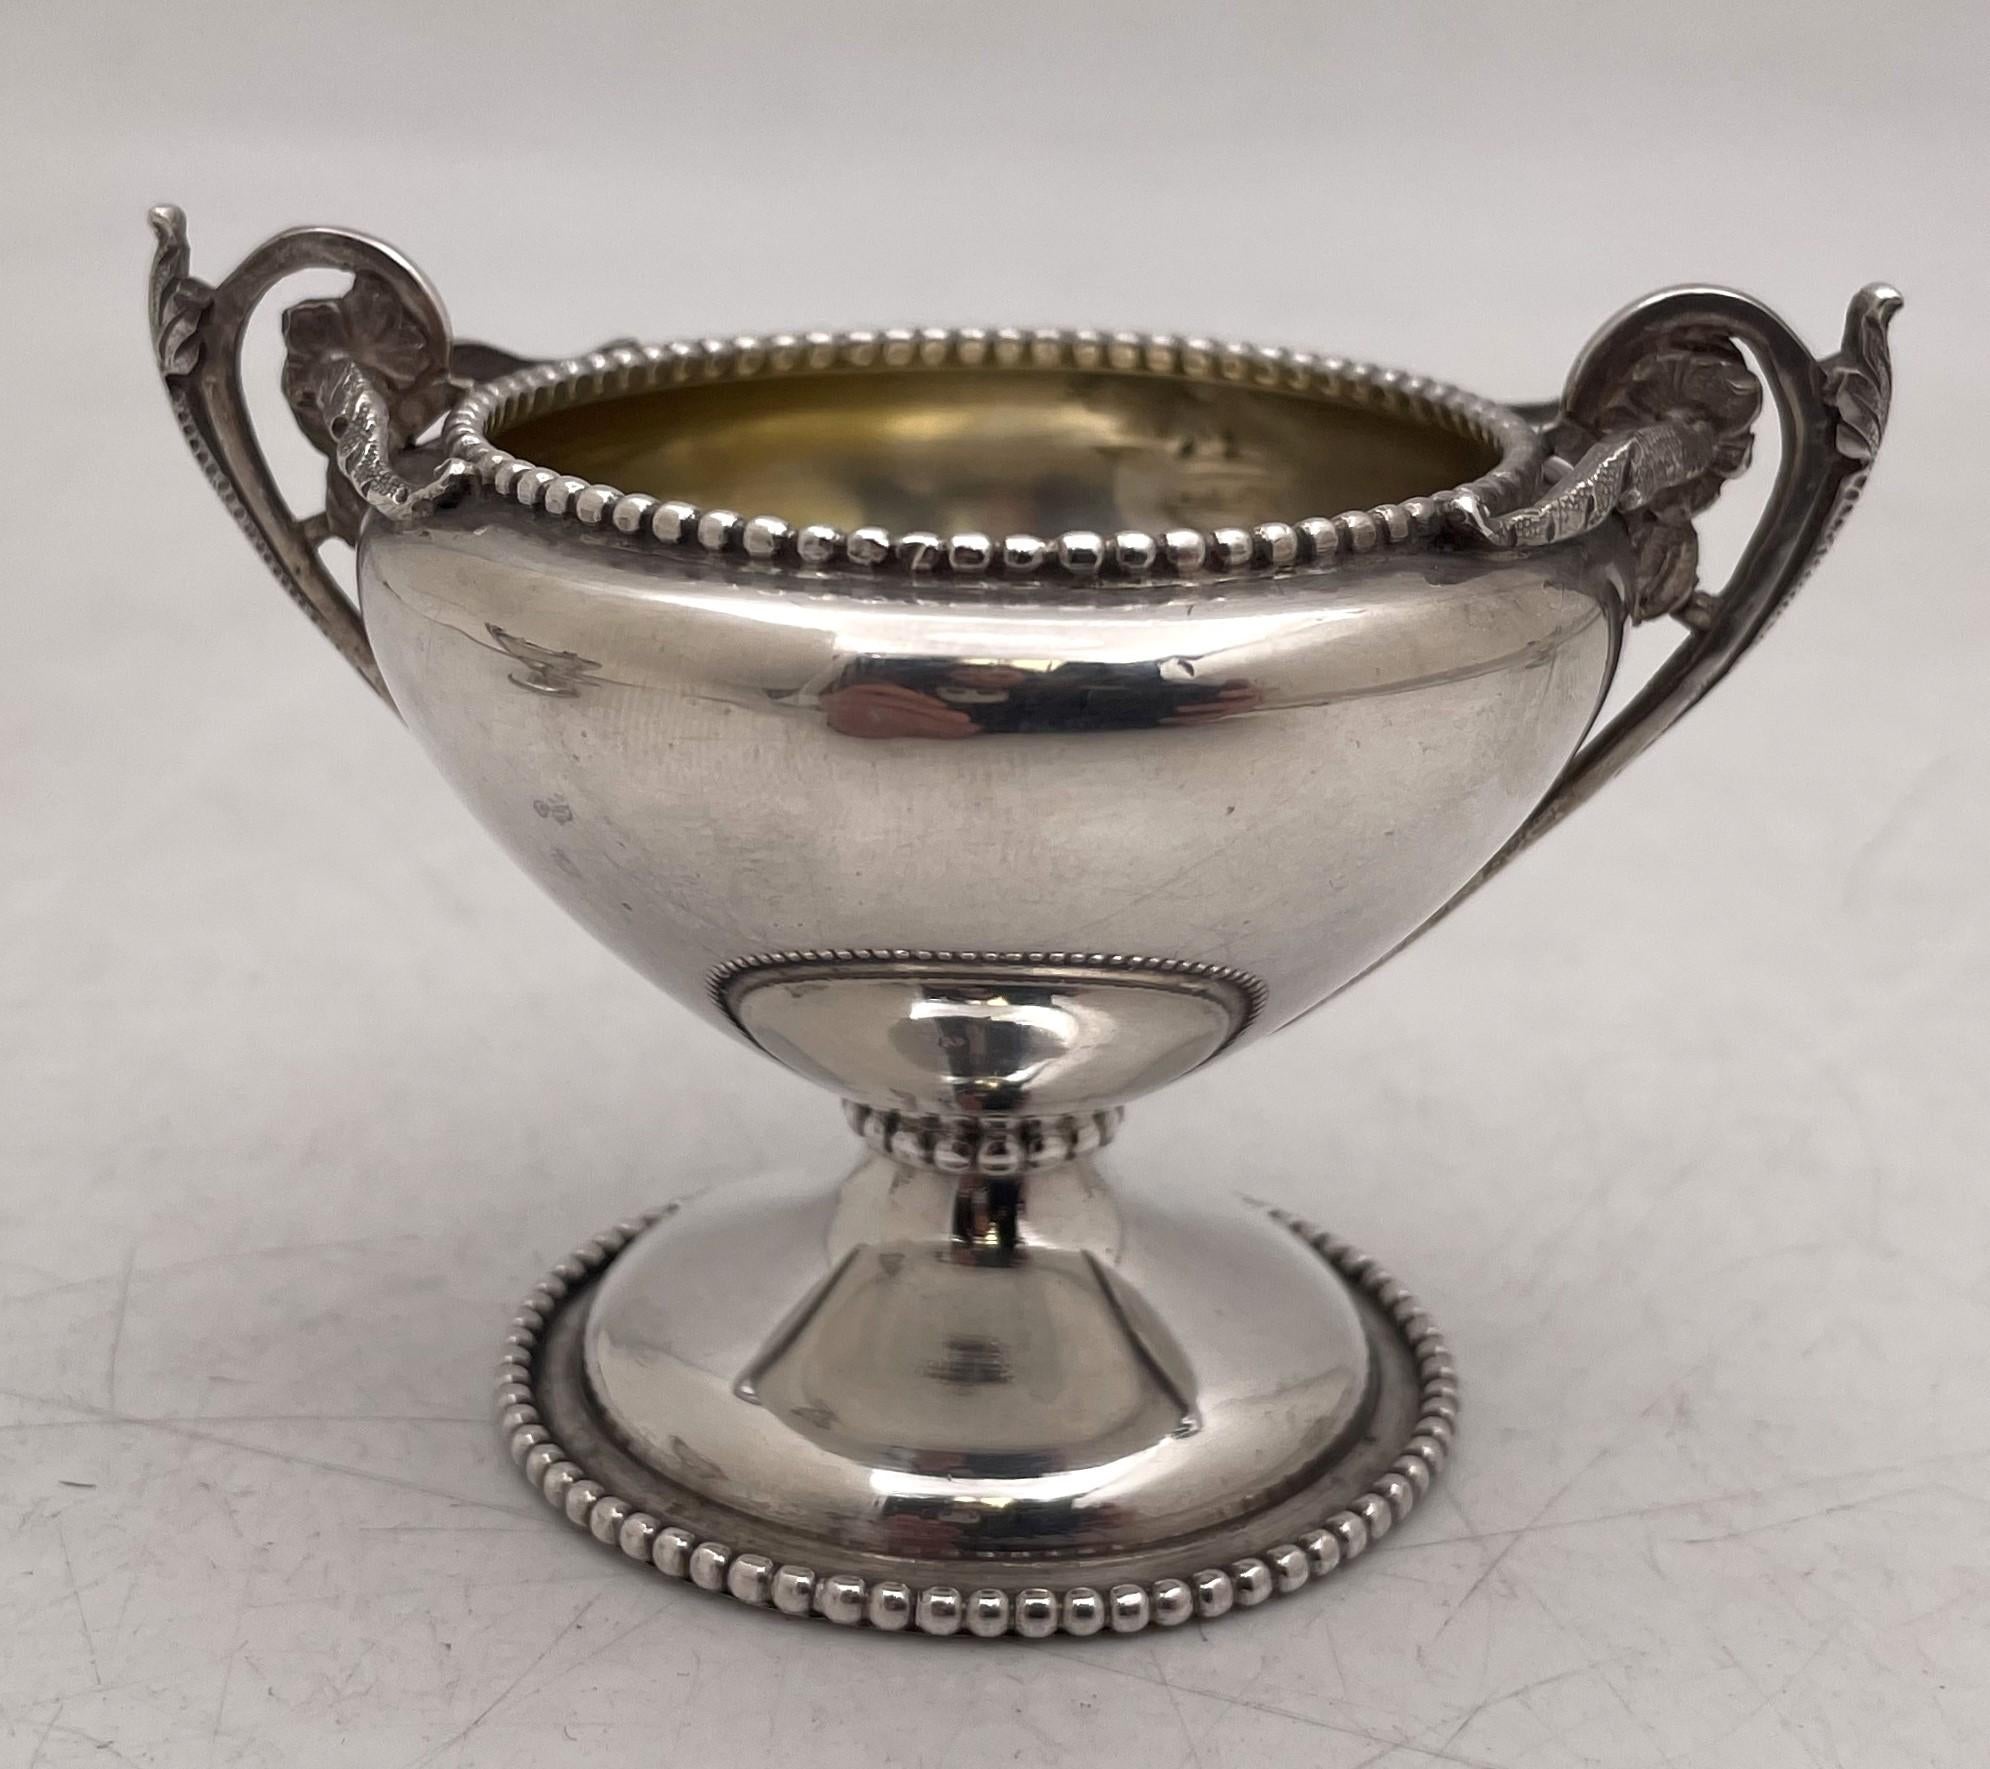 Bailey & Co. set of 4 coin silver open salts, gilt inside, with beaded motifs at the base and rim, with handles adorned with leaves. They measure 3 1/4'' from handle to handle by 2 1/2'' in height, weigh 7.7 troy ounces, and bear hallmarks and a